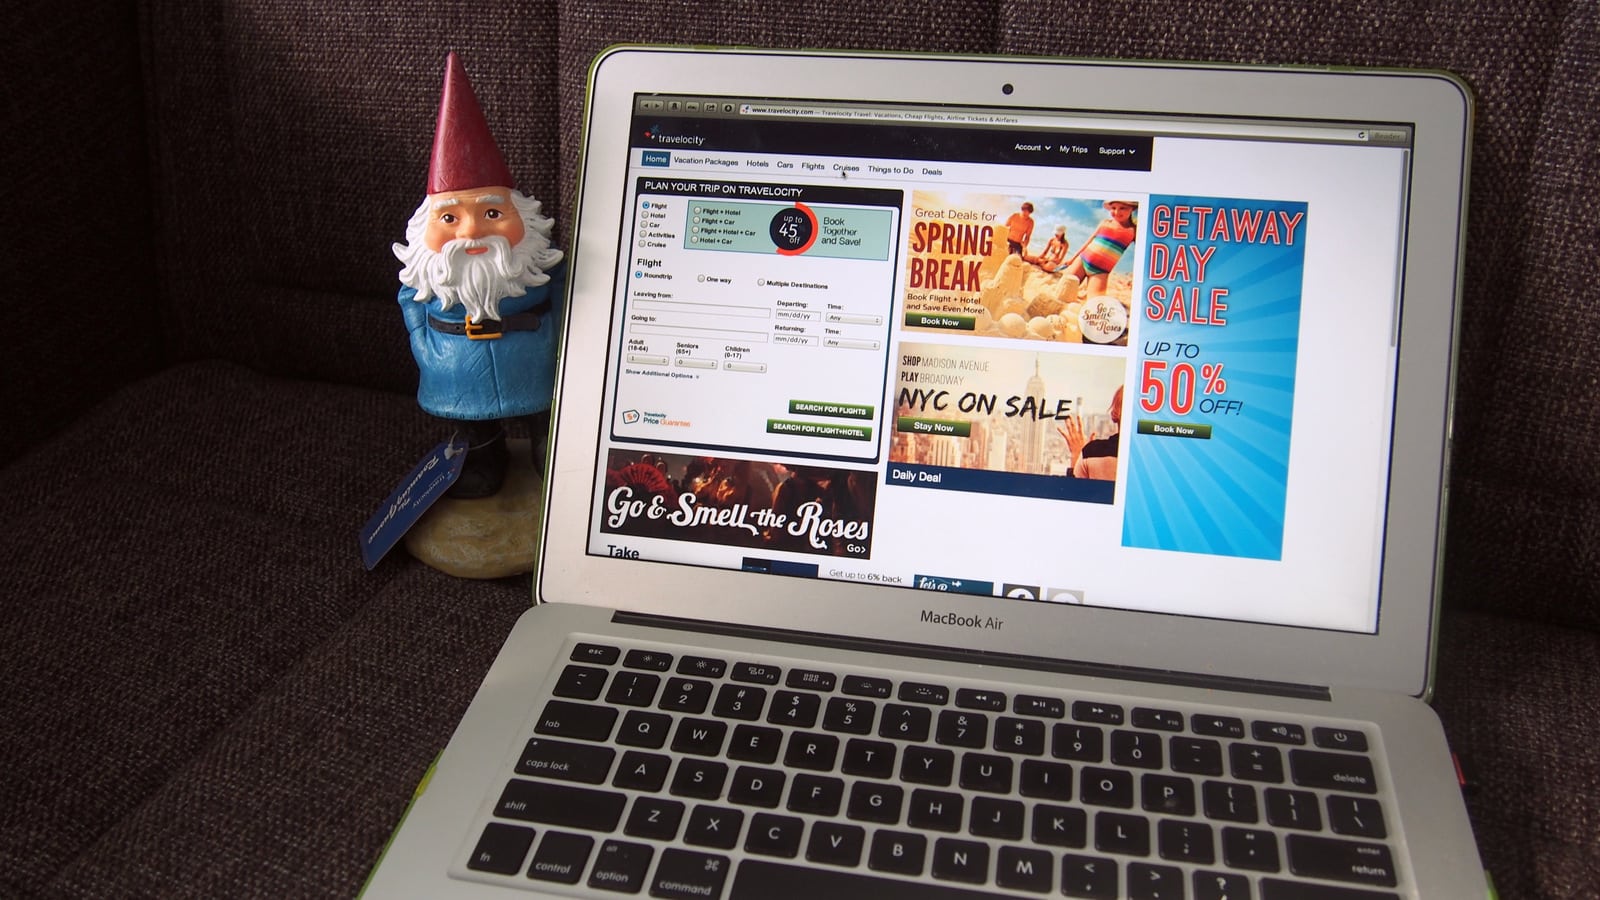 Travelocity, no longer among the top 10 booking sites in travel.